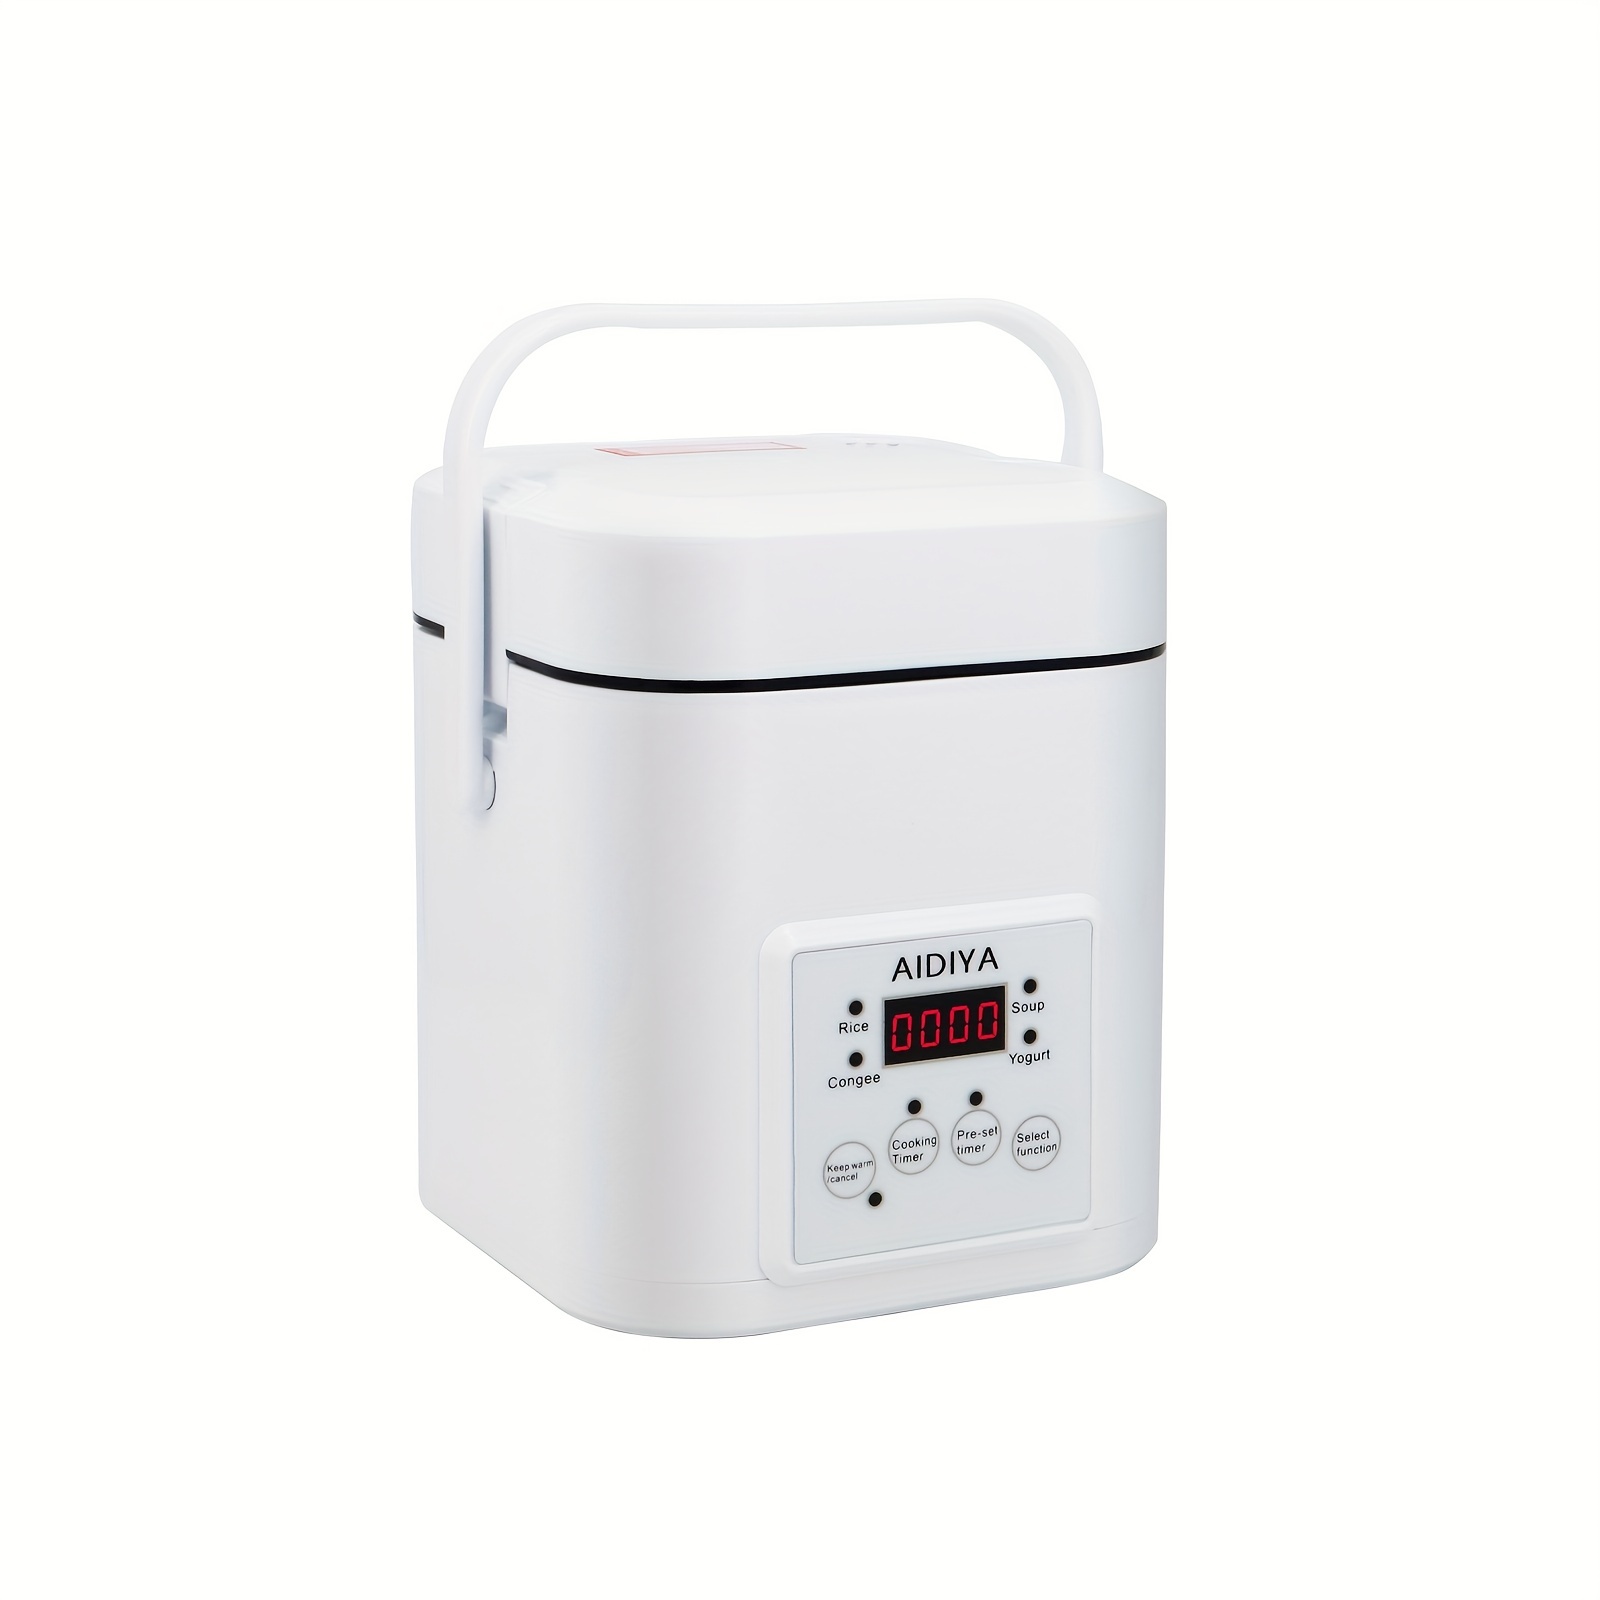  Moosum Rice Cooker Maker 5-Cup(Uncooked) with Steamer, Ceramic  coating, BPA Free, Large capacity, Stainless Steel: Home & Kitchen